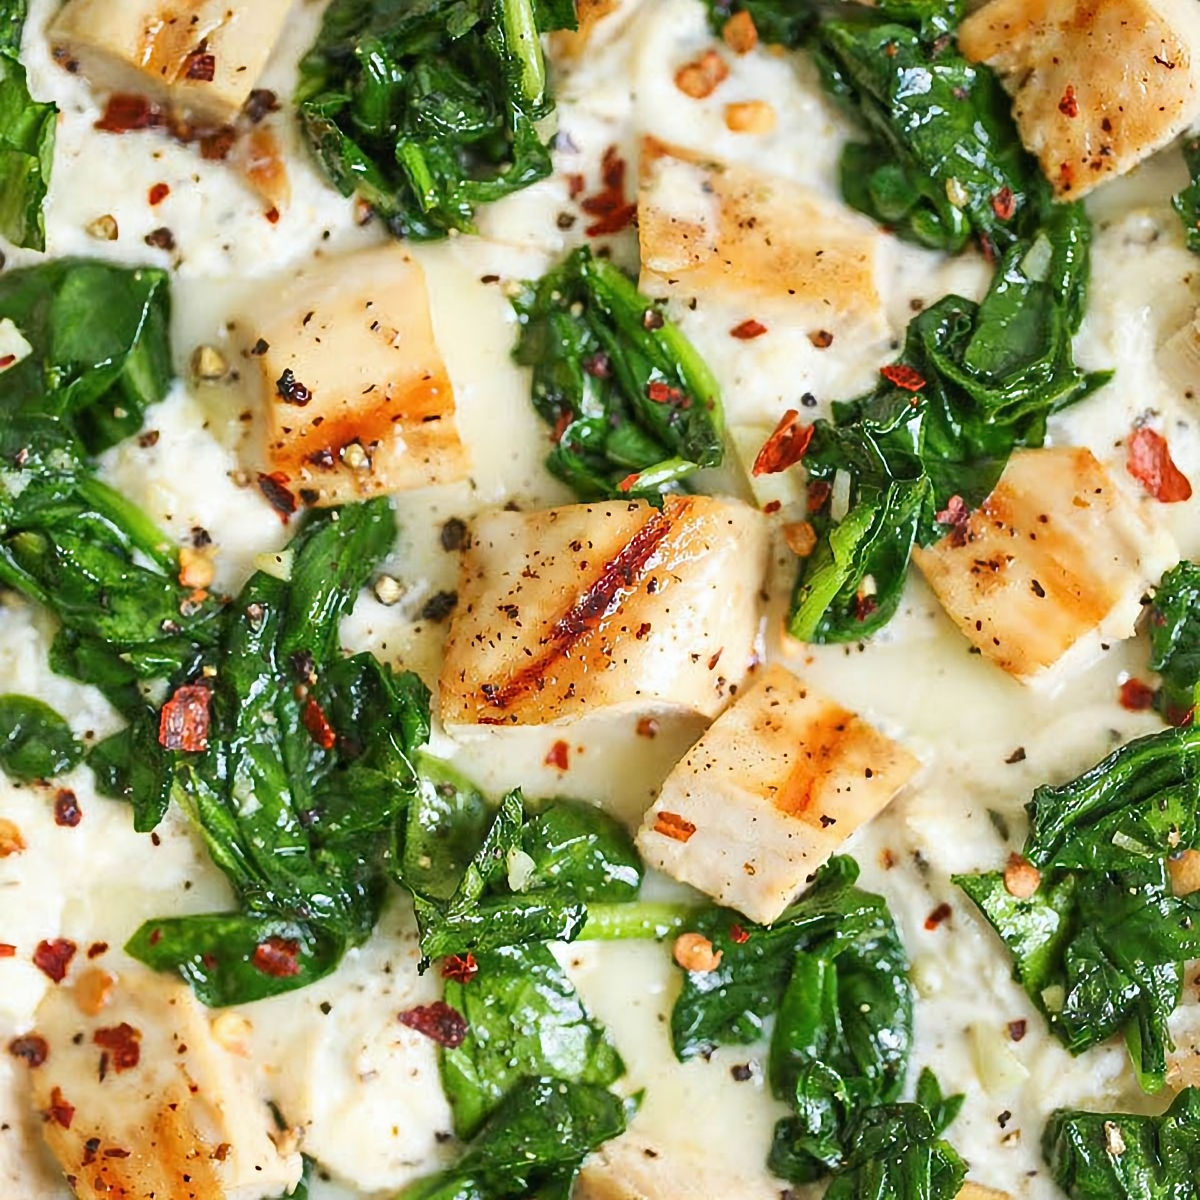 15. Roasted Garlic, Chicken and Spinach White Pizza